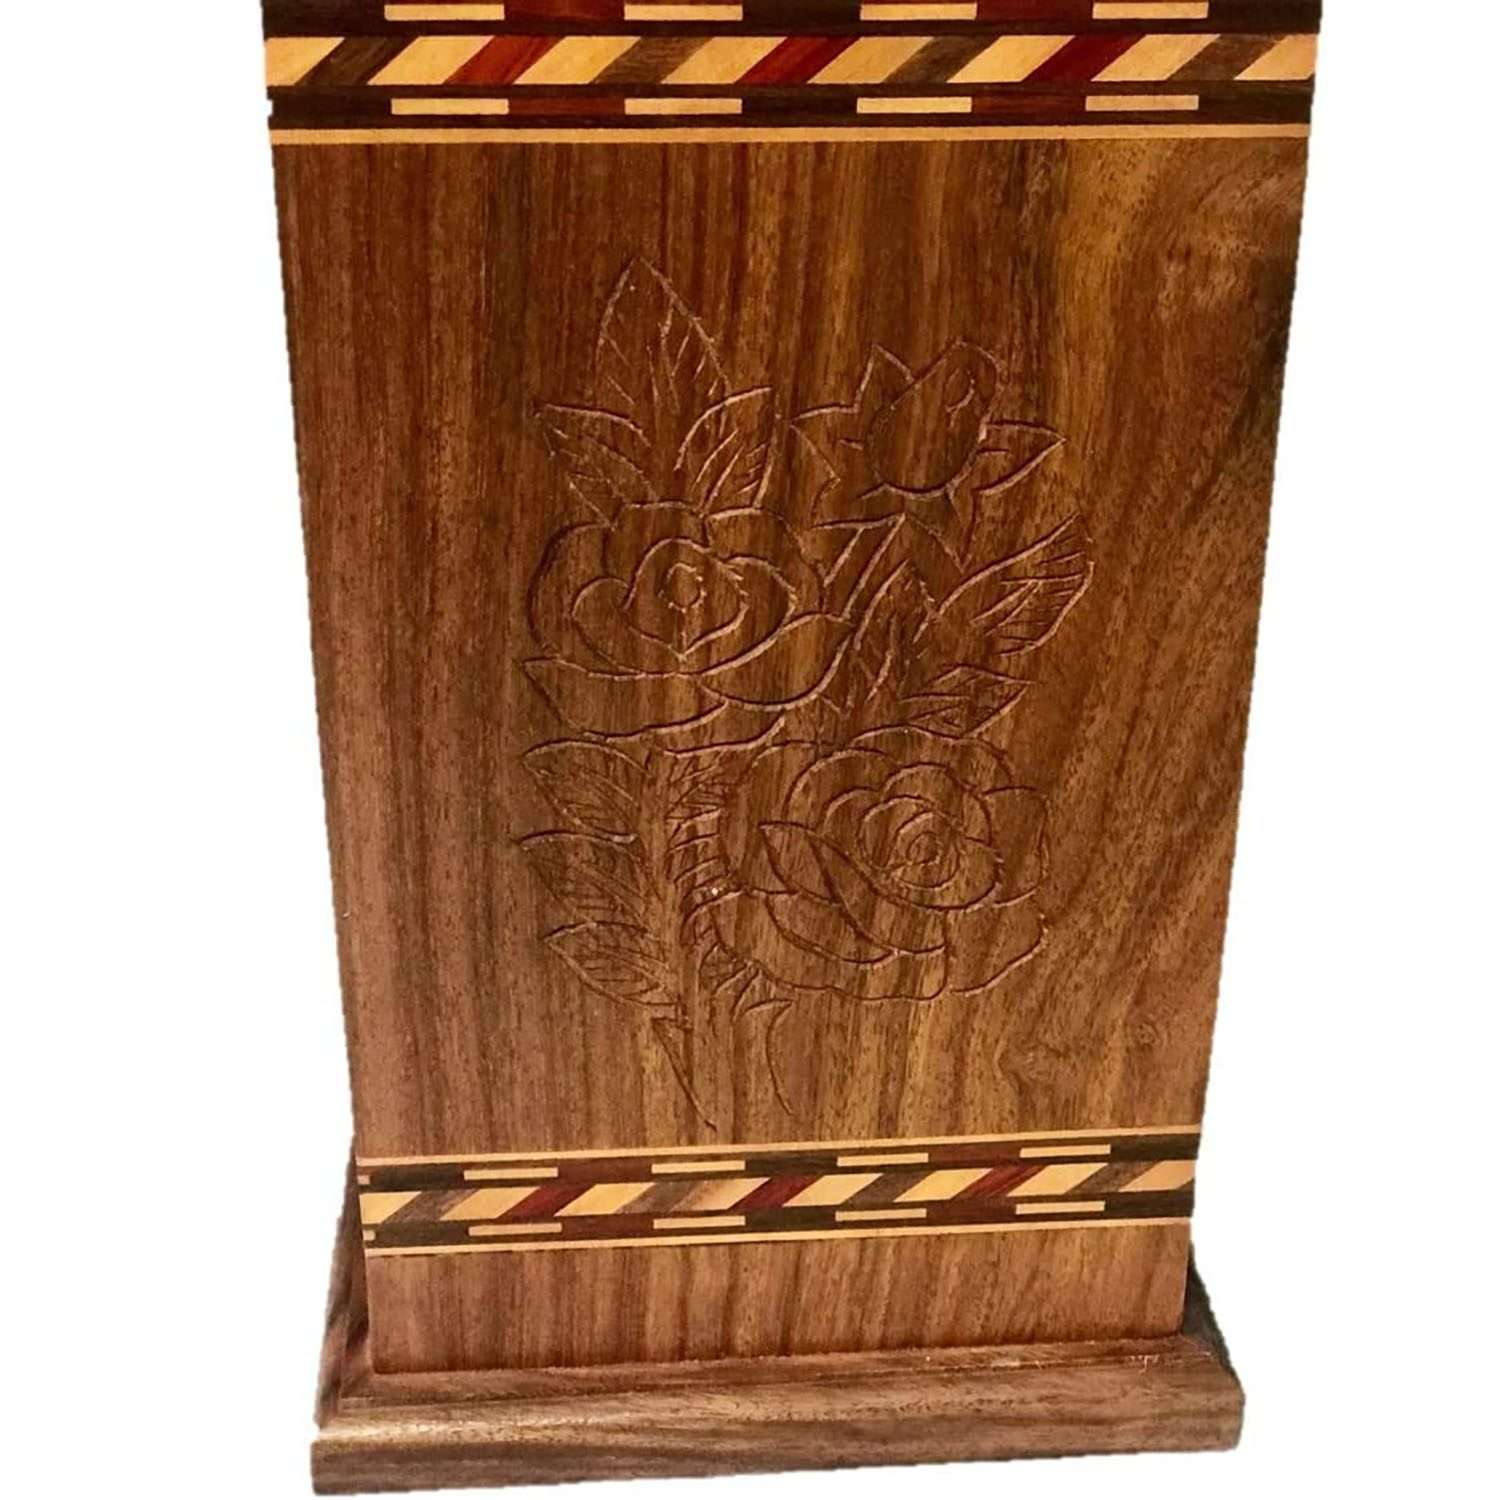 Wood Cremation Urn Boxes for Human Ashes Remain | Beautiful Hand carved Wooden Boxes for Urn | Wood Urn Box manufacturer & supplier